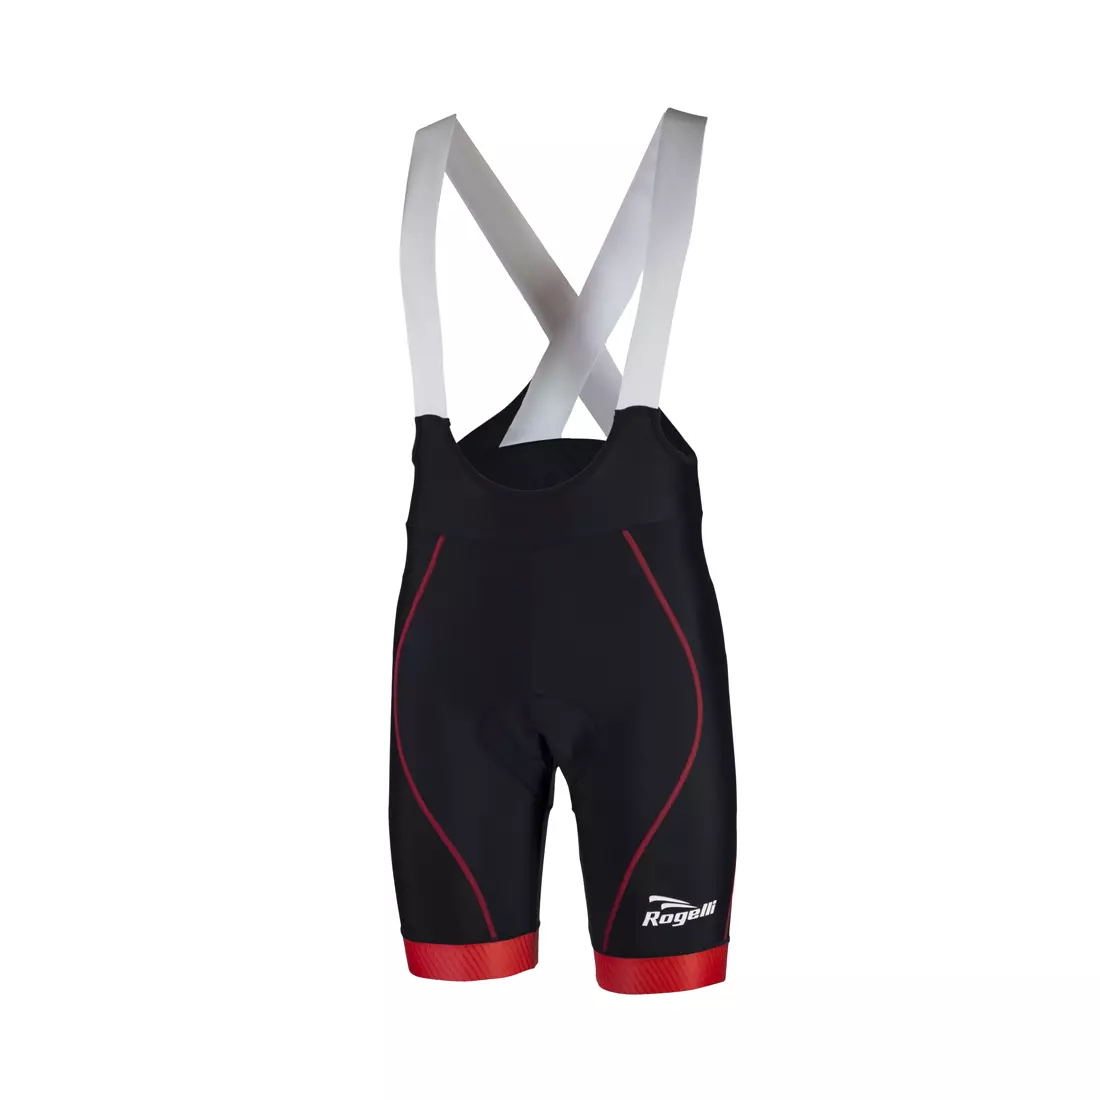 ROGELLI PORRENA 2.0 men's cycling shorts, harness, red